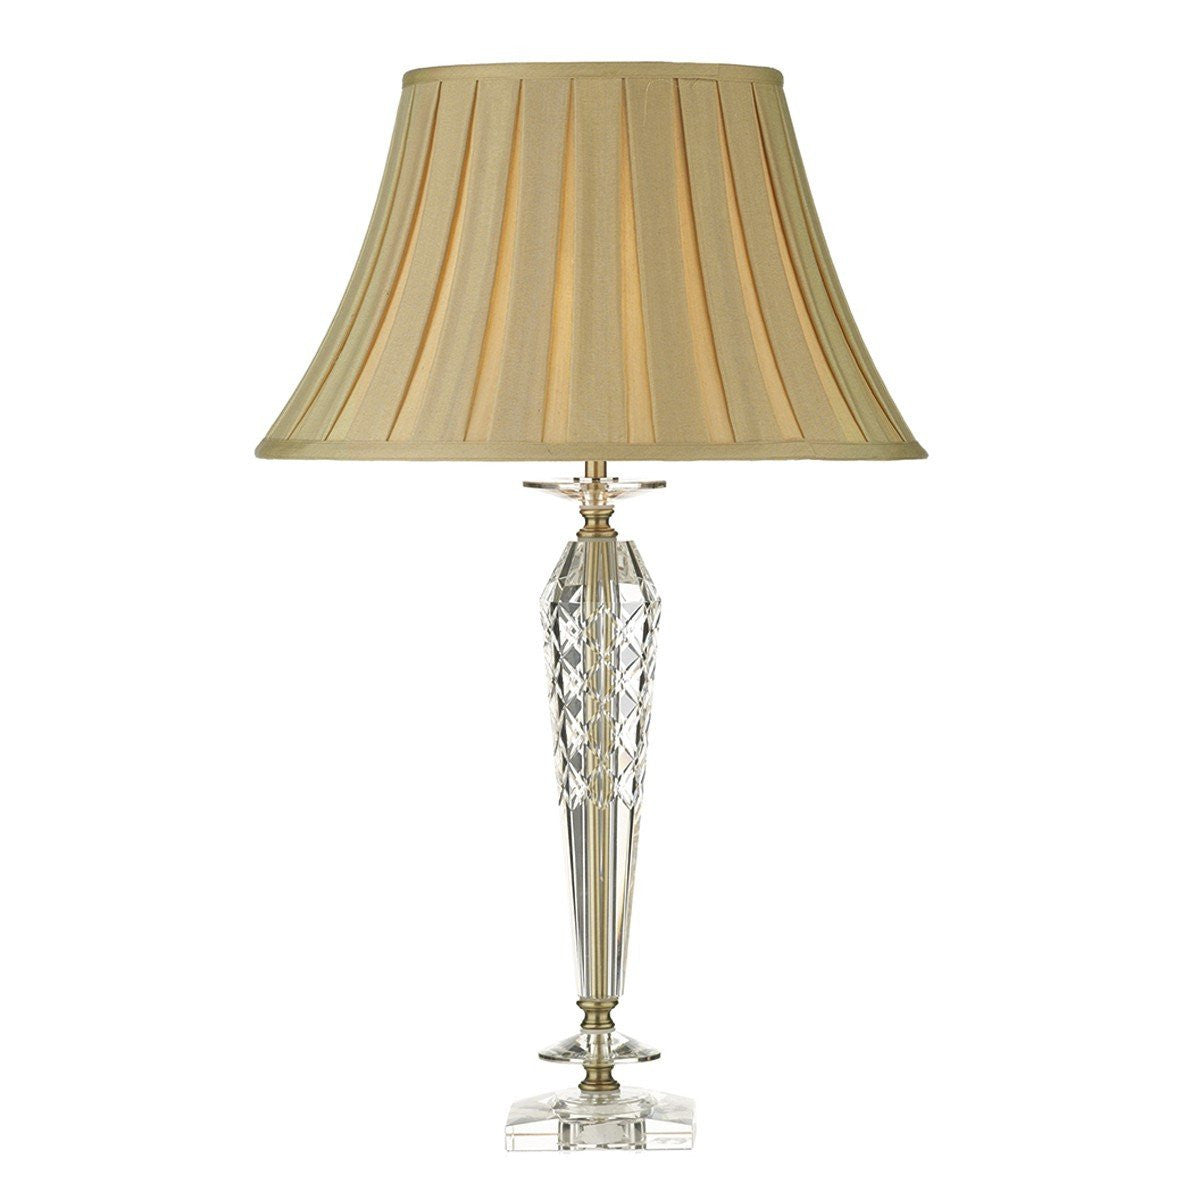 Nell Clear Table Lamp - London Lighting - 1